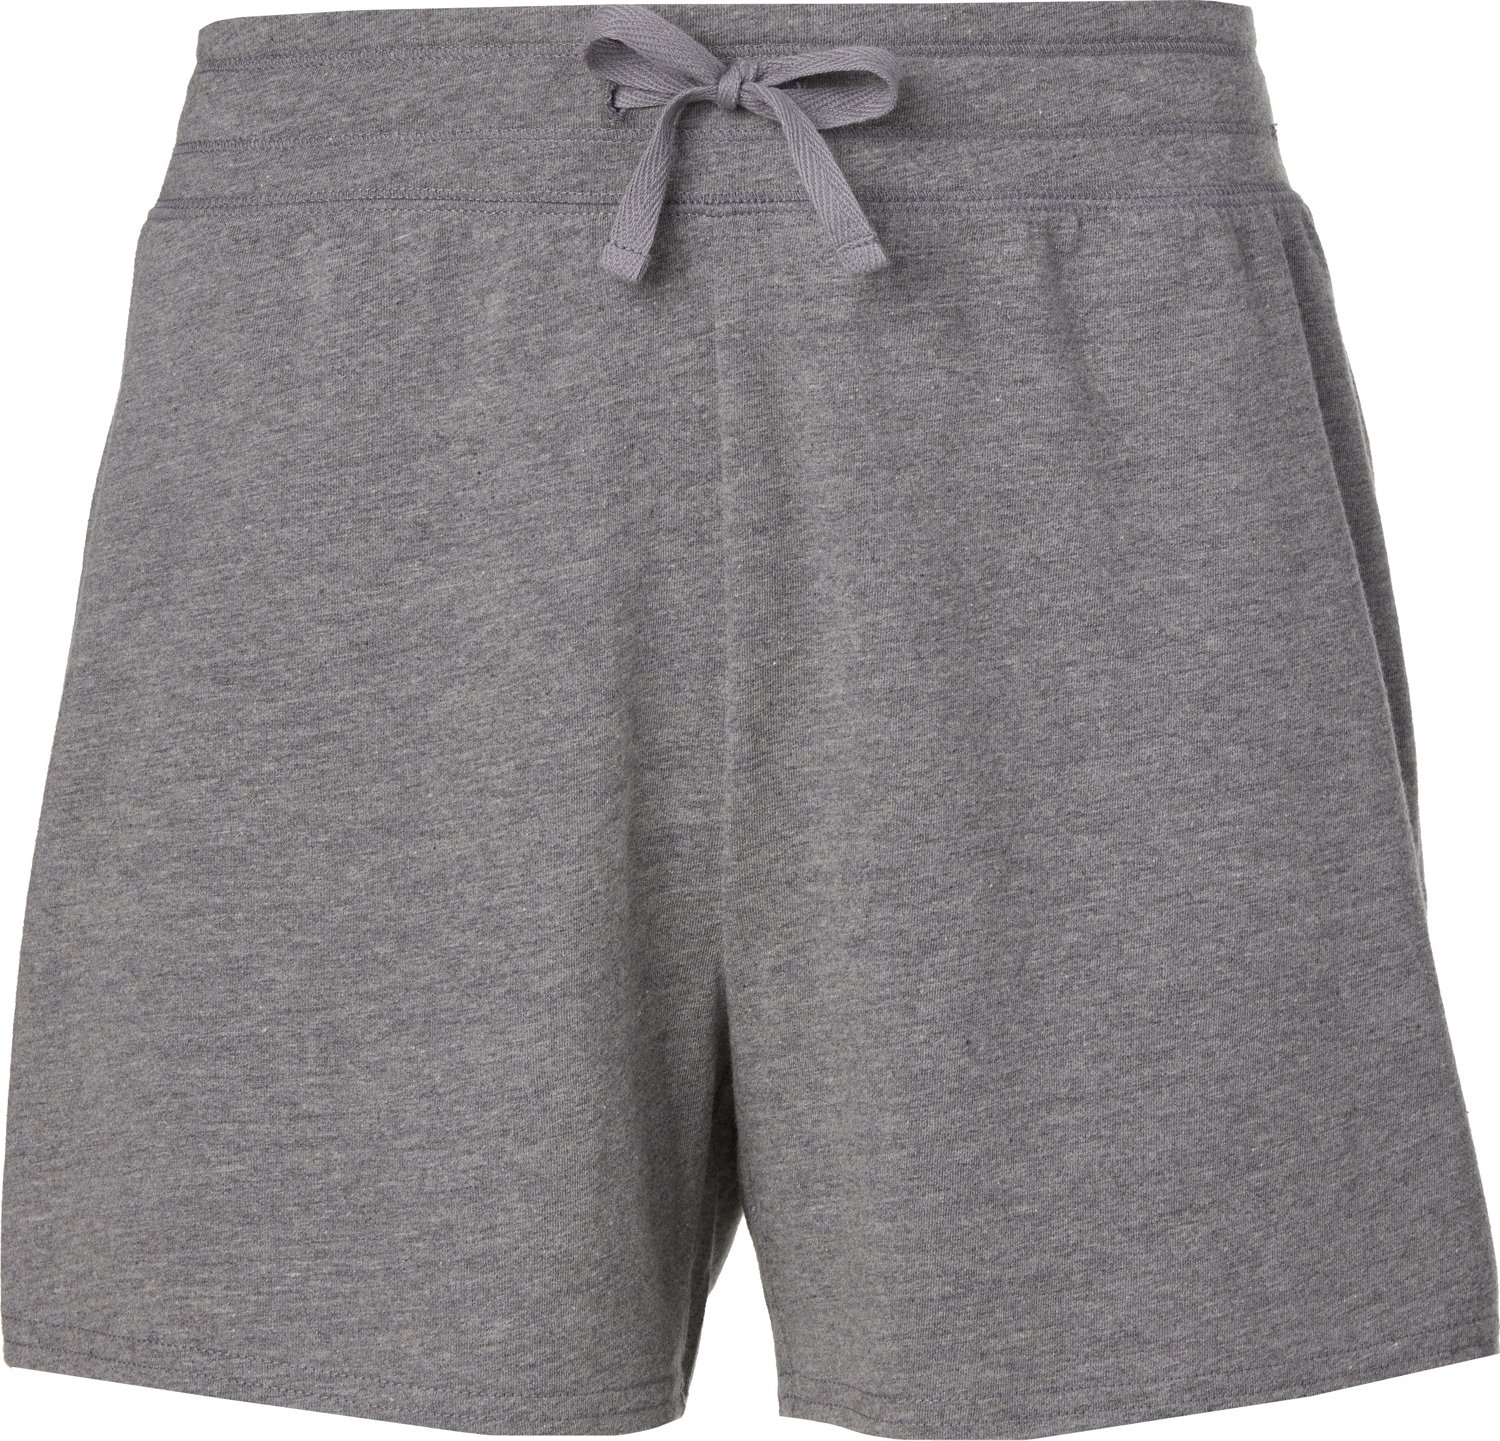 BCG Women's Athletic Knit Shorts 4 in. | Academy